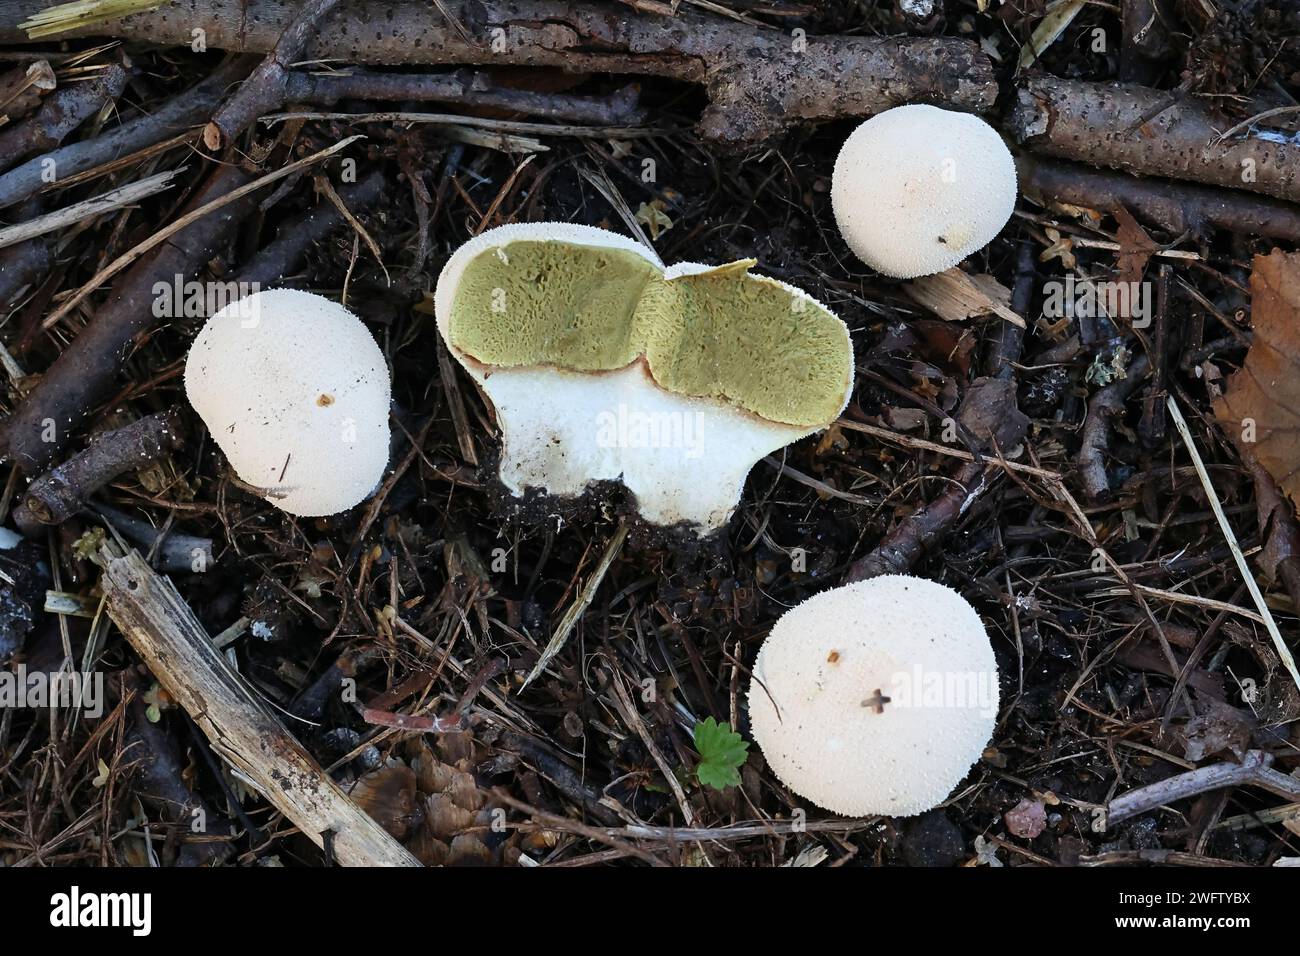 Lycoperdon pratense, also called Vascellum pratense, commonly known as Meadow Puffball, wild fungus from Finland Stock Photo